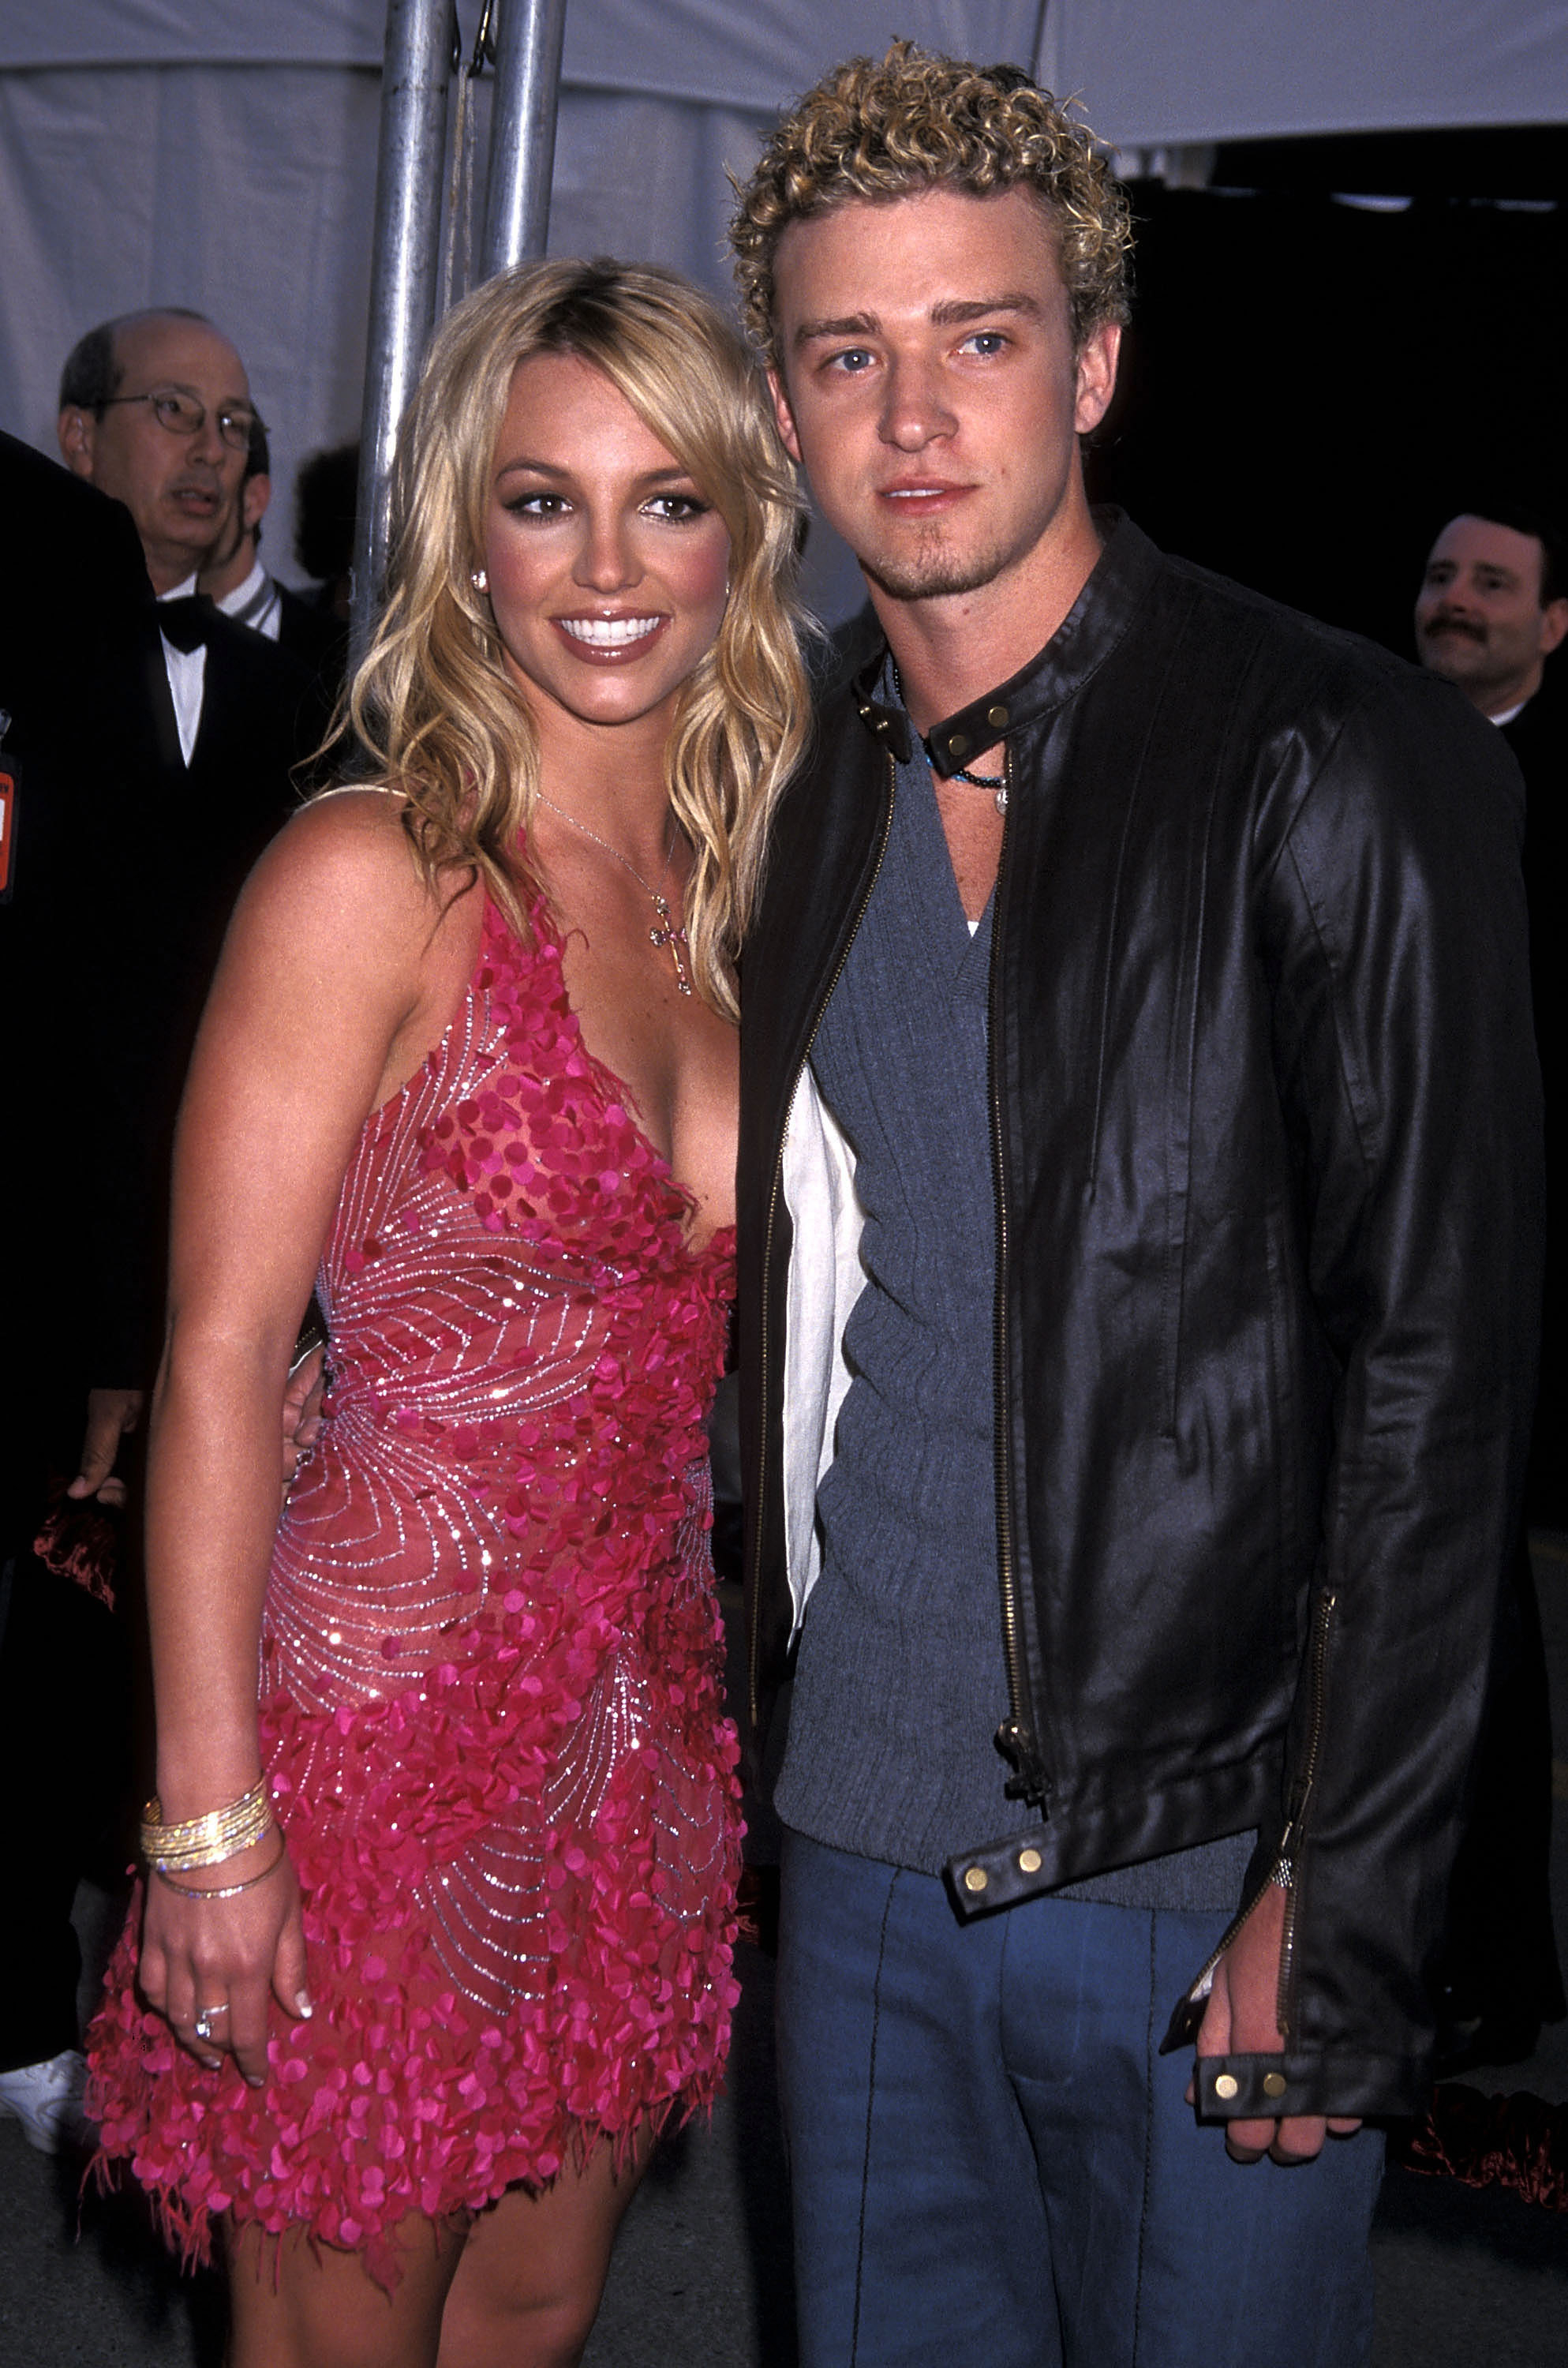 Closeup of Britney Spears and Justin Timberlake at an event